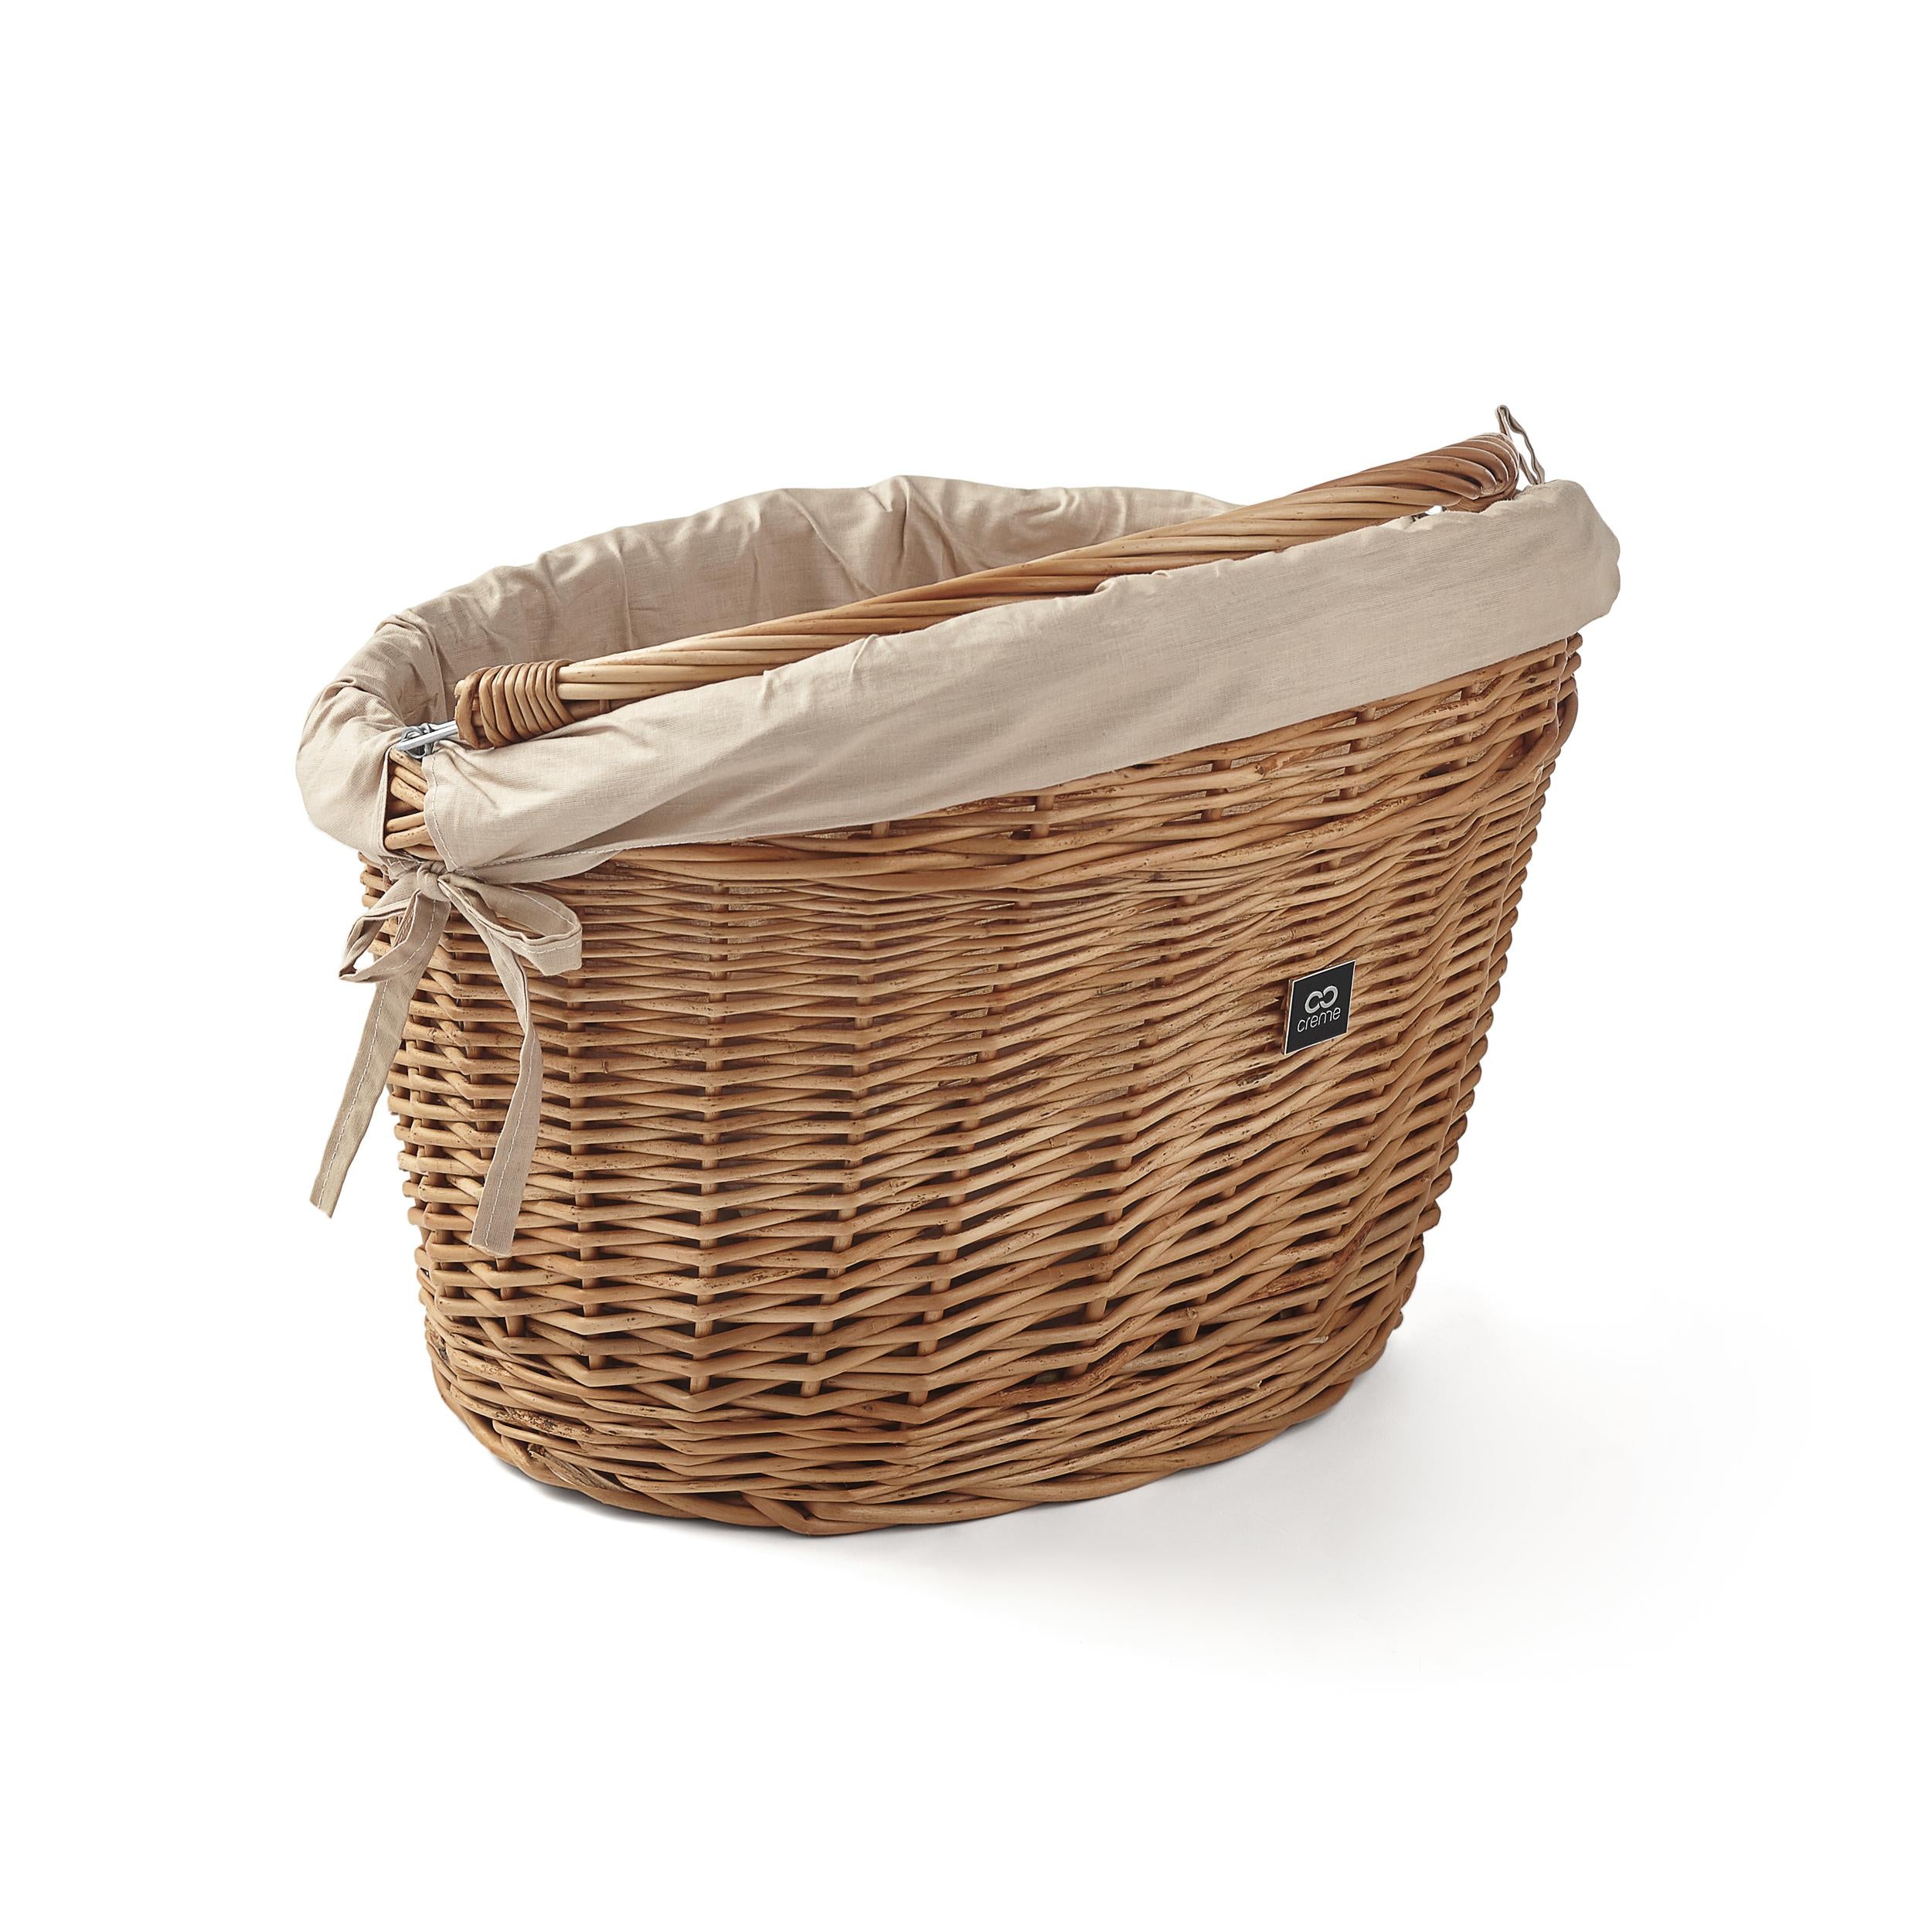 Creme Wicked Bicycle Wicker Baskets Large – VeloLifestyle 𝗯𝘆 𝗔𝗹𝗹𝗼  𝗩𝗲𝗹𝗼 𝗜𝗻𝗰